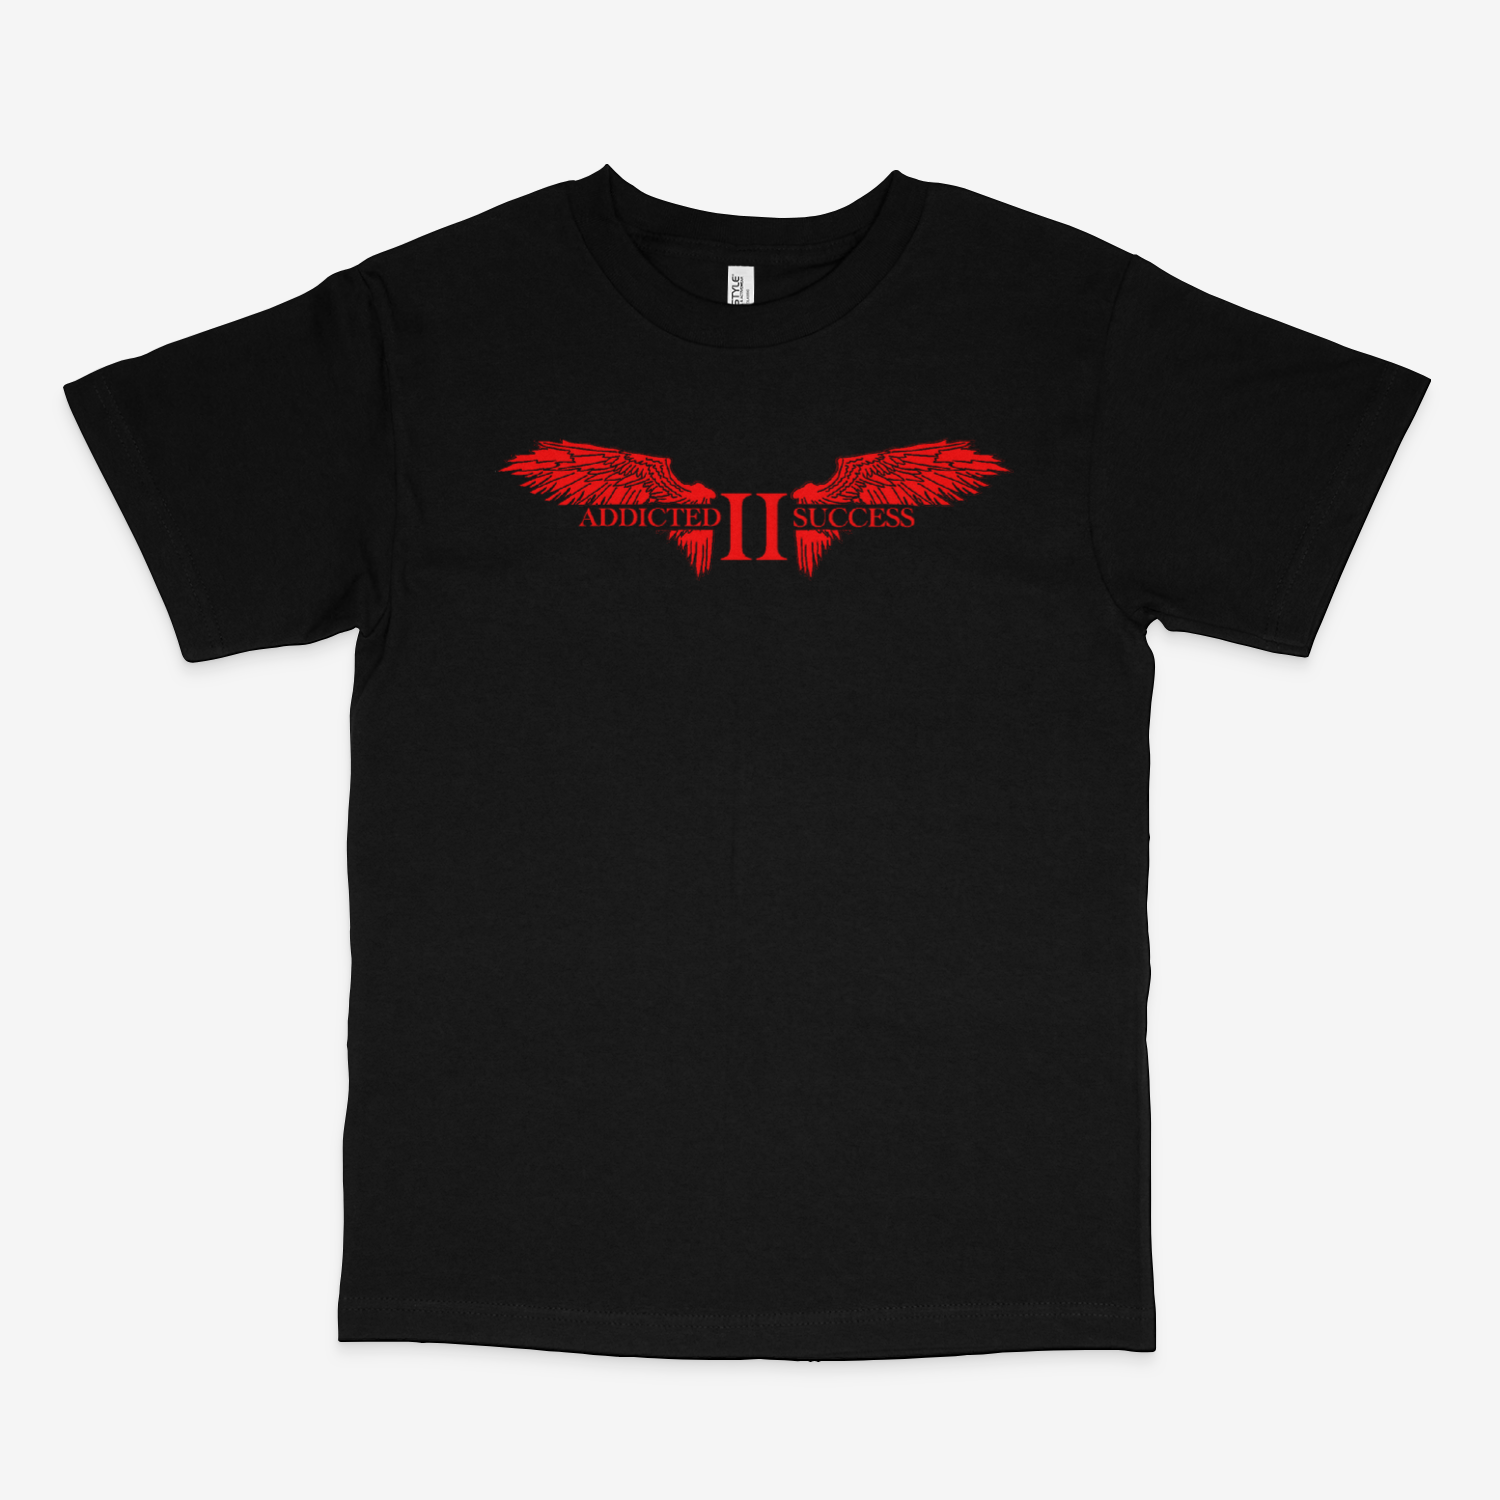 Black and Red T-Shirt